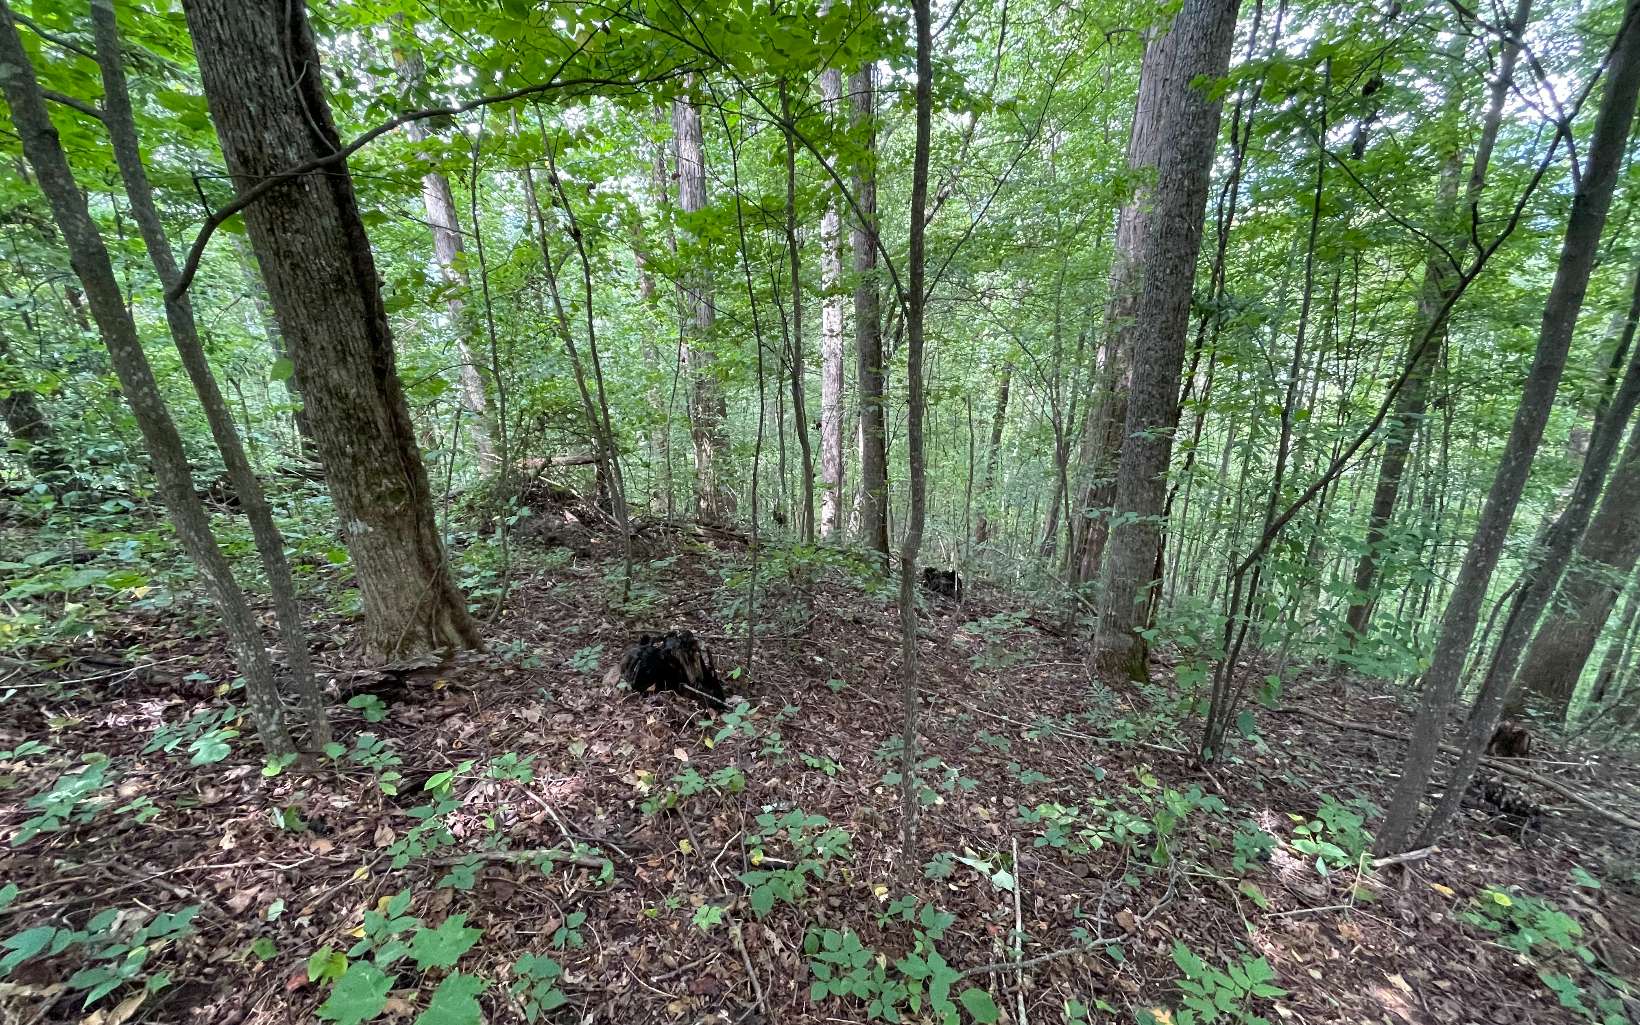 BEAUTIFULLY WOODED LAND IN THE NORTH GEORGIA MOUNTAINS!! Fantastic private lots in Phase II of the Bear Trail Subdivision. A Quiet part of Towns County only 10 minutes east of Hiawassee. The perfect place to build your North Georgia mountain getaway.